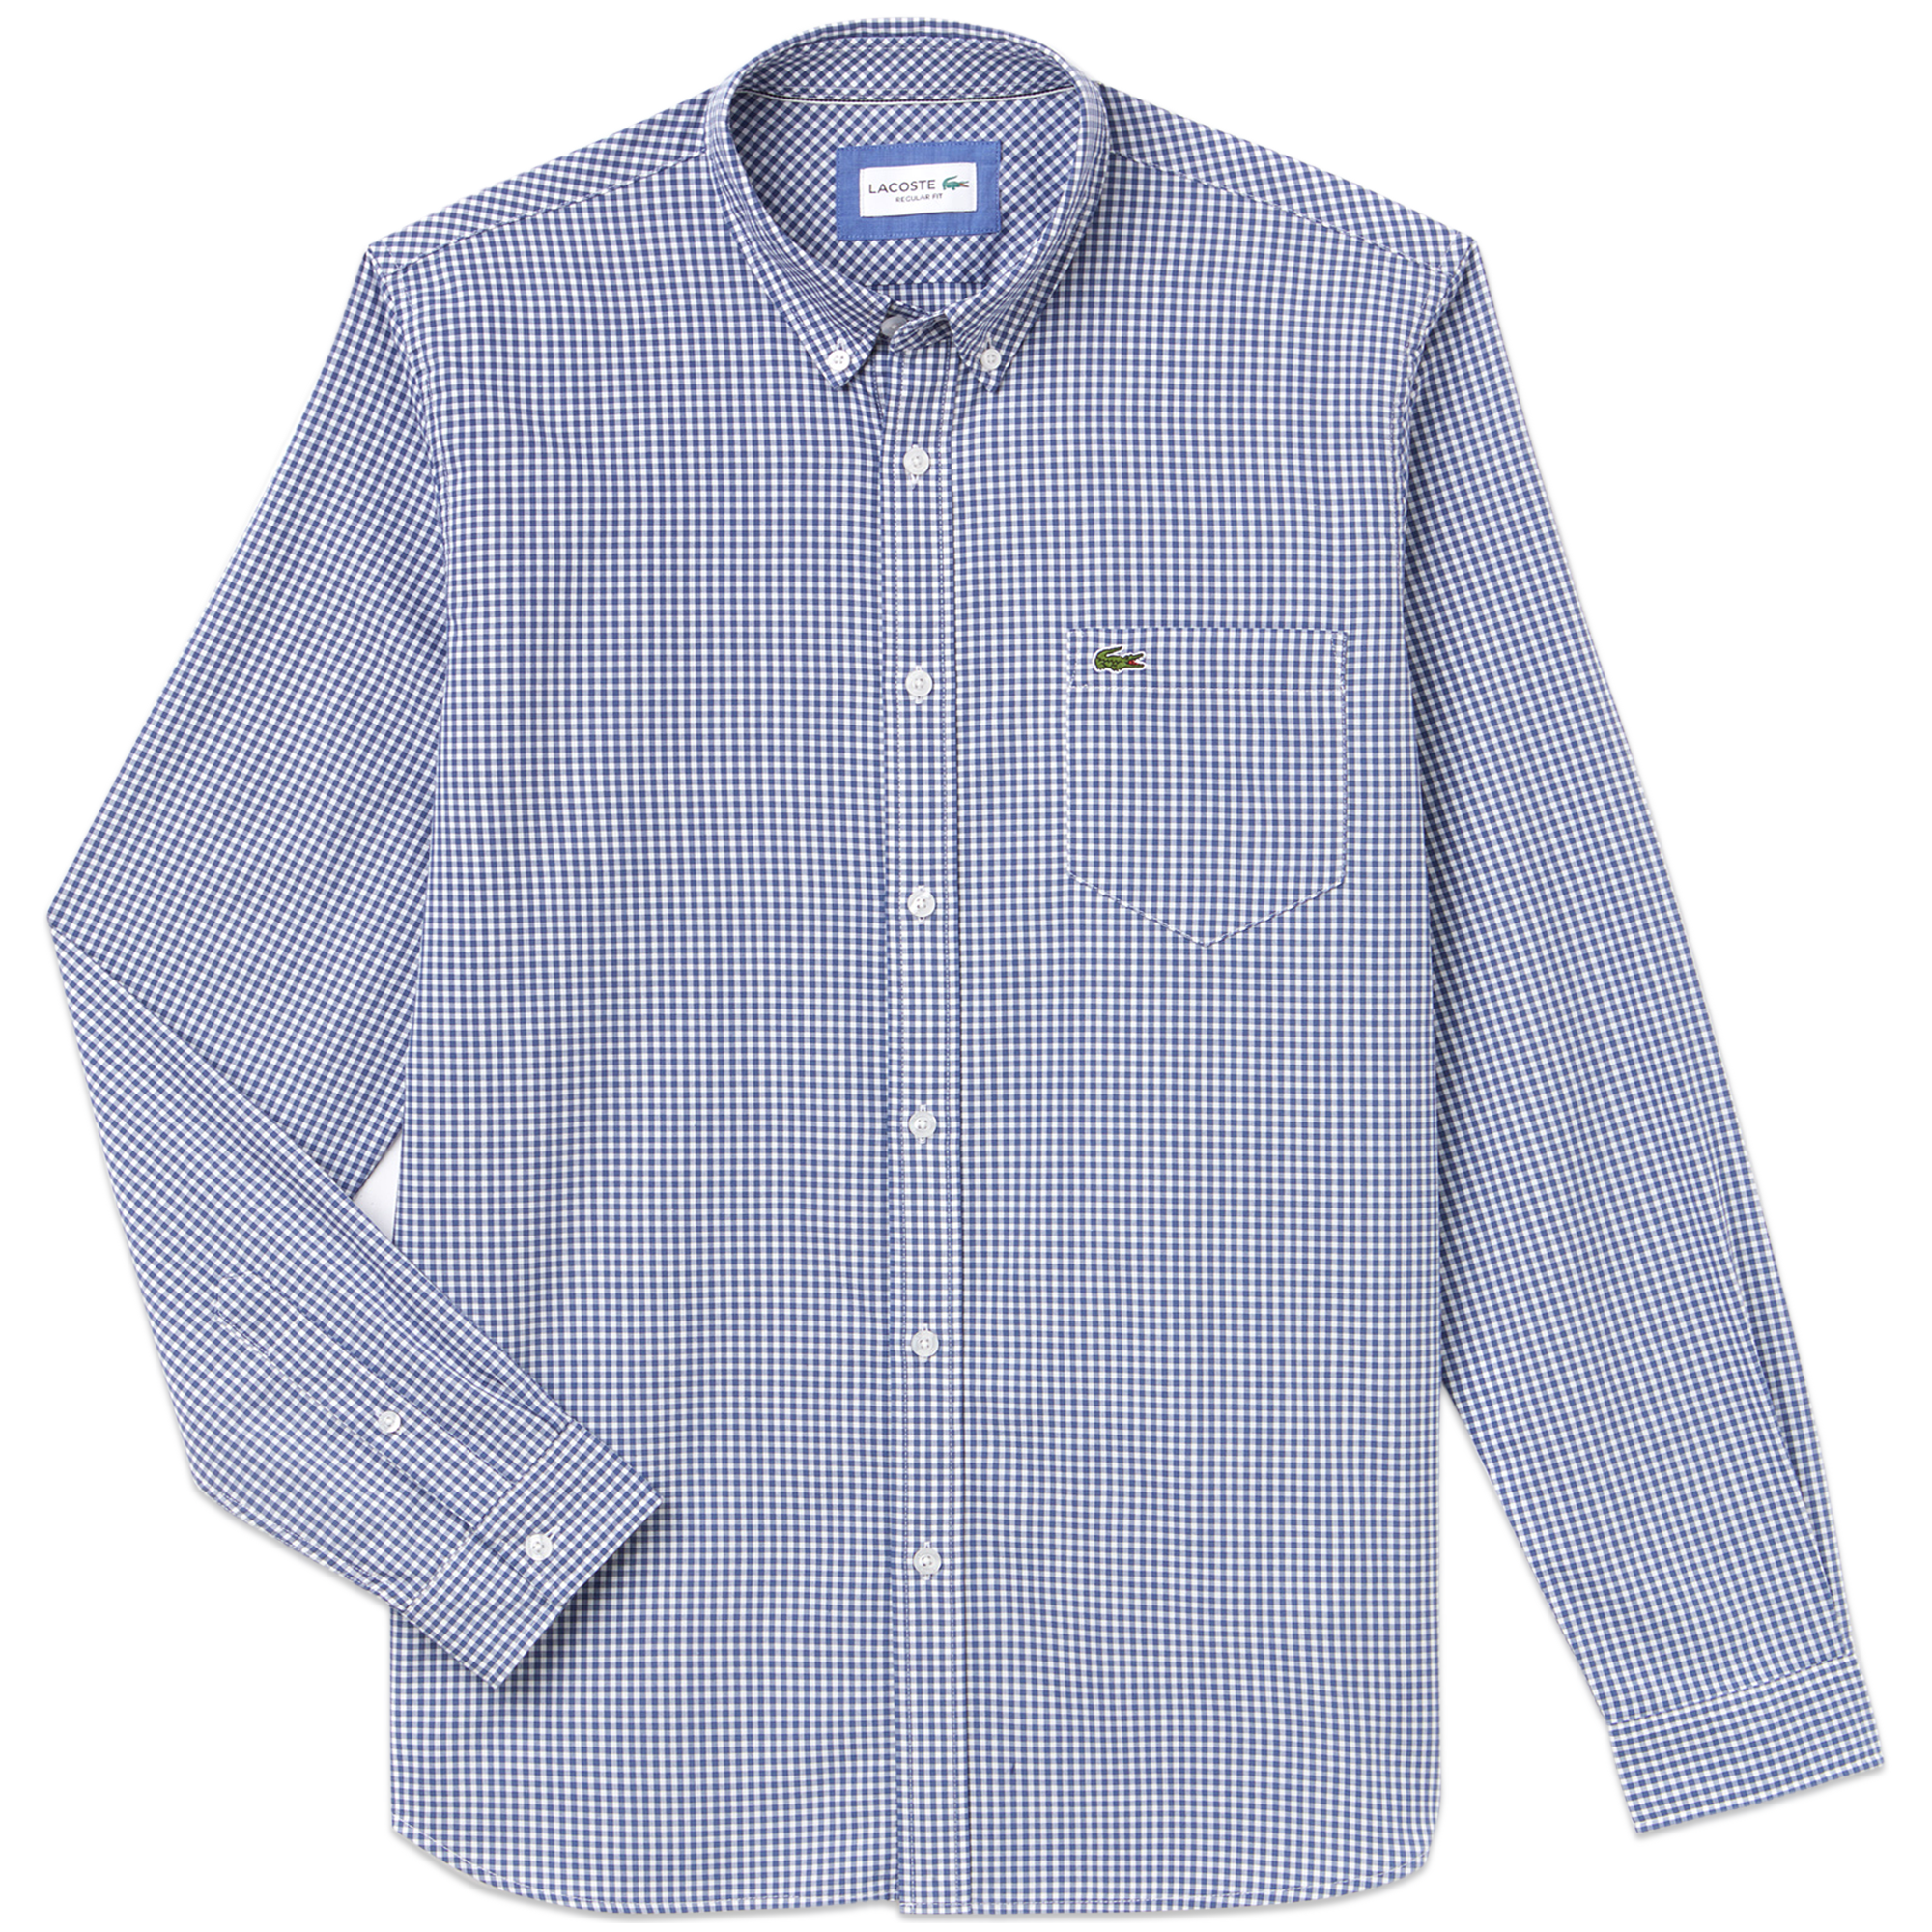 Lacoste Gingham Check Shirt CH0483 - Blue/White